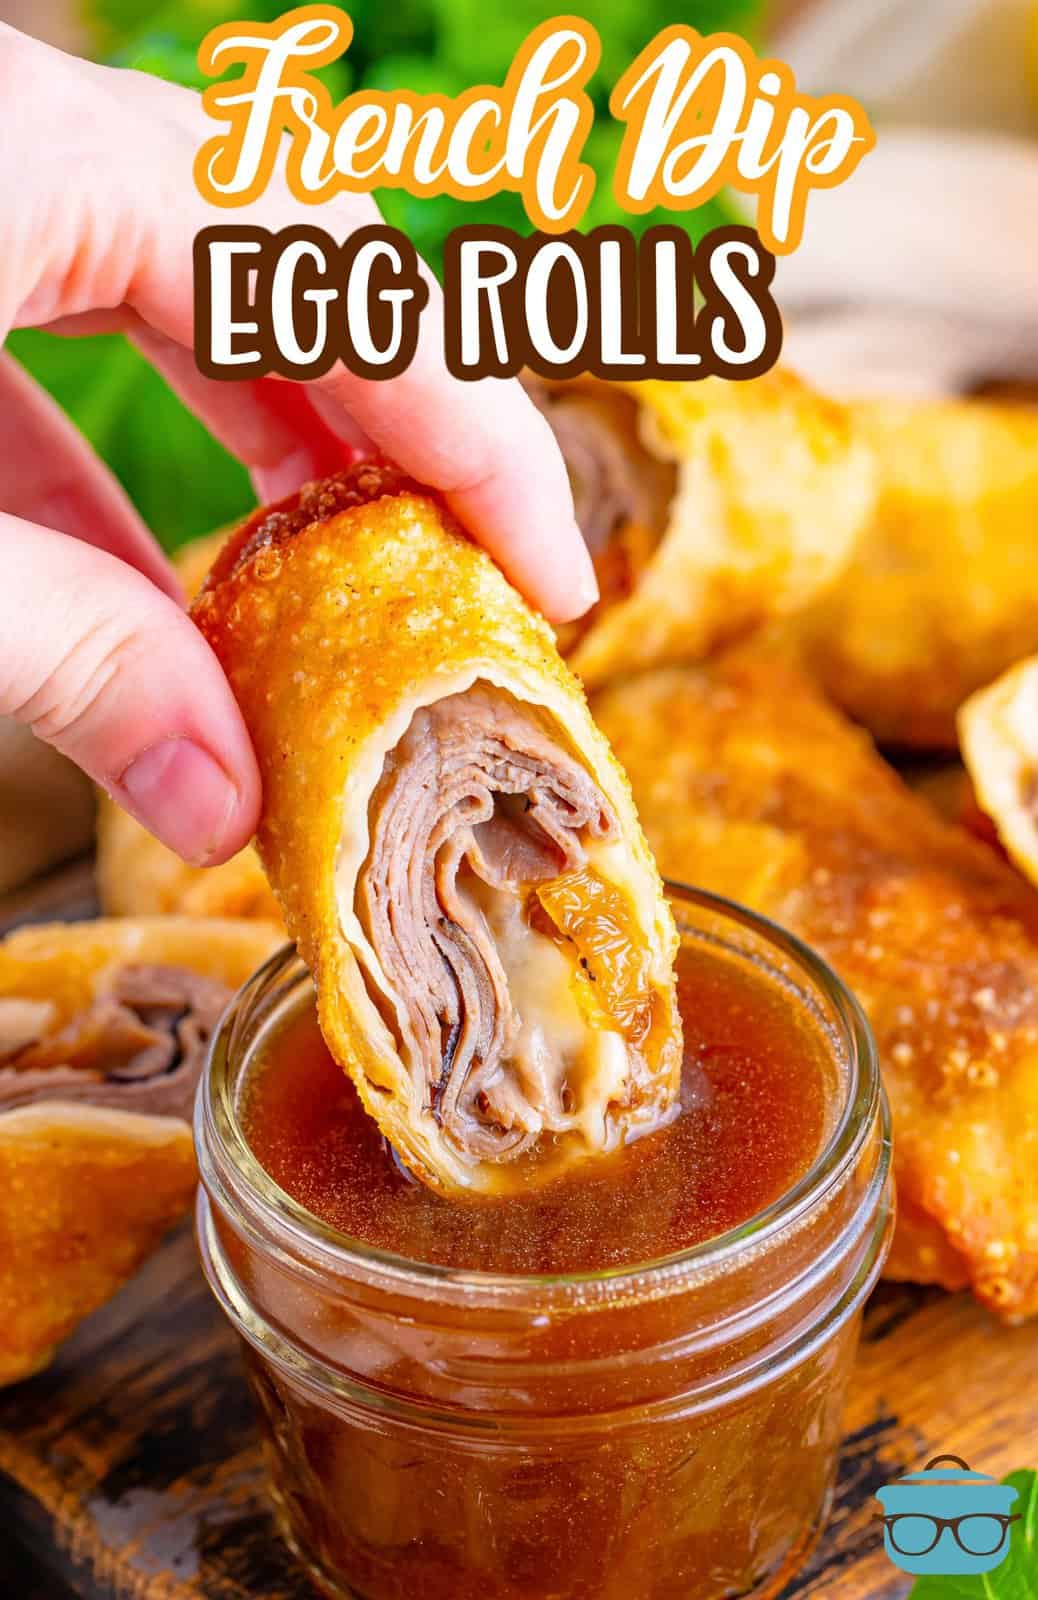 A hand holding a French Dip egg roll and dipping it in sauce.